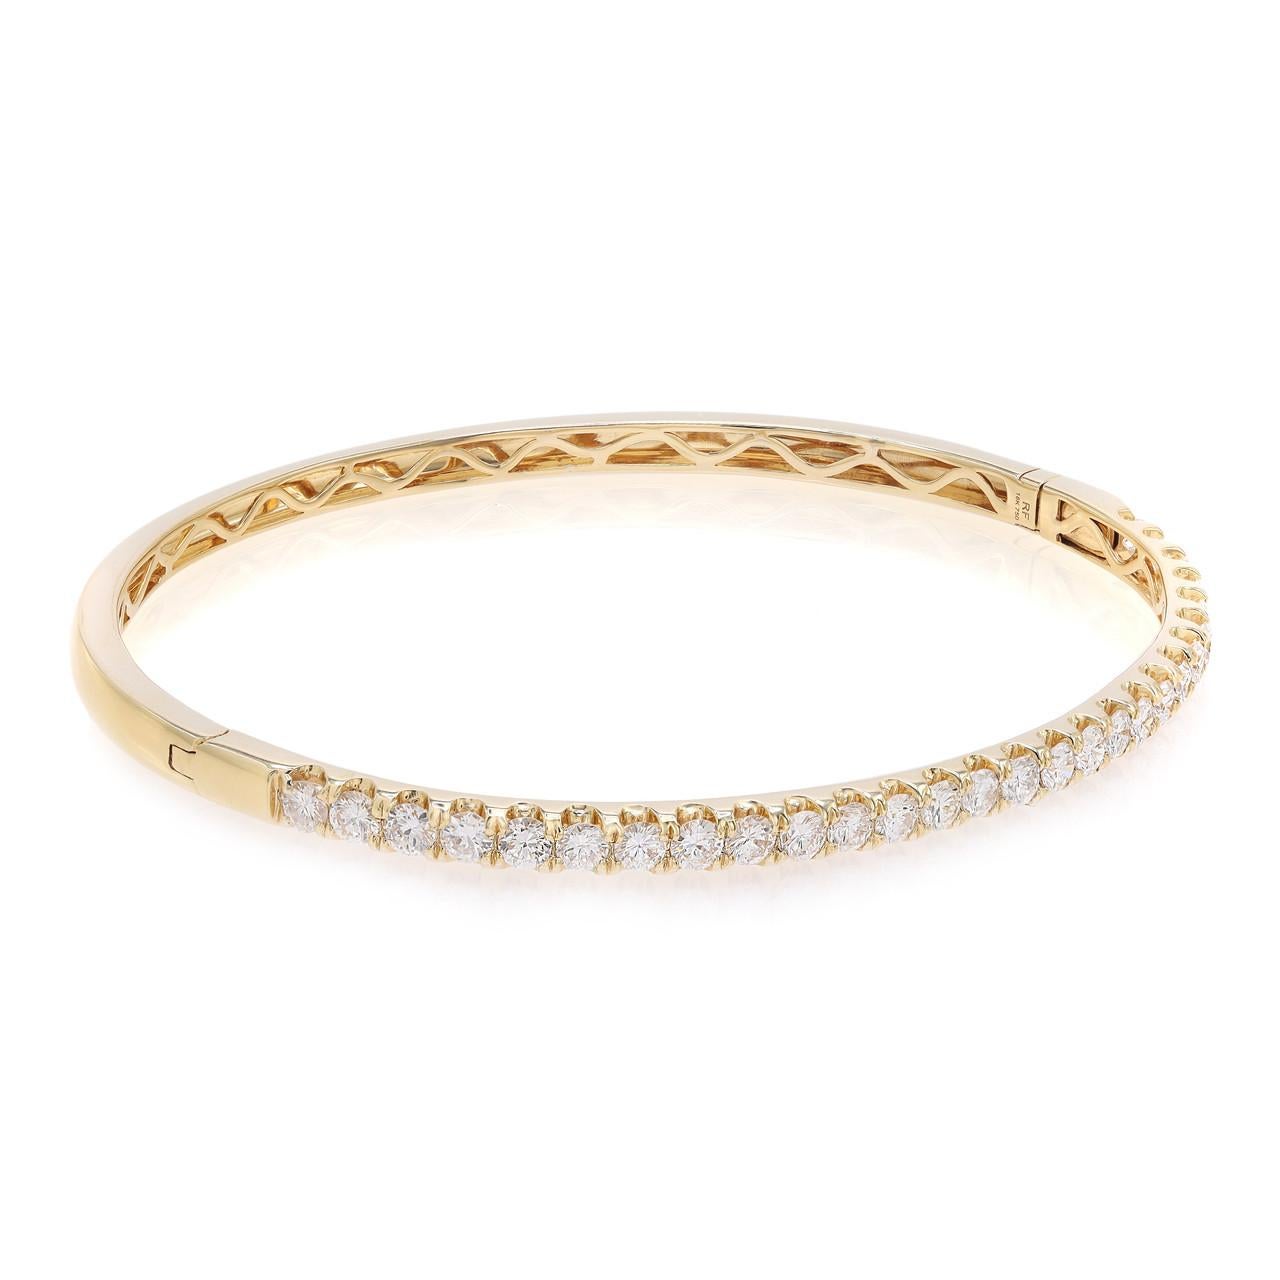 Introducing the versatile and elegant diamond bangle, a perfect blend of modernity and sophistication. This chic piece features 3.00 carats of brilliant round diamonds, meticulously pavé set in 18k yellow gold. The lustrous yellow gold complements